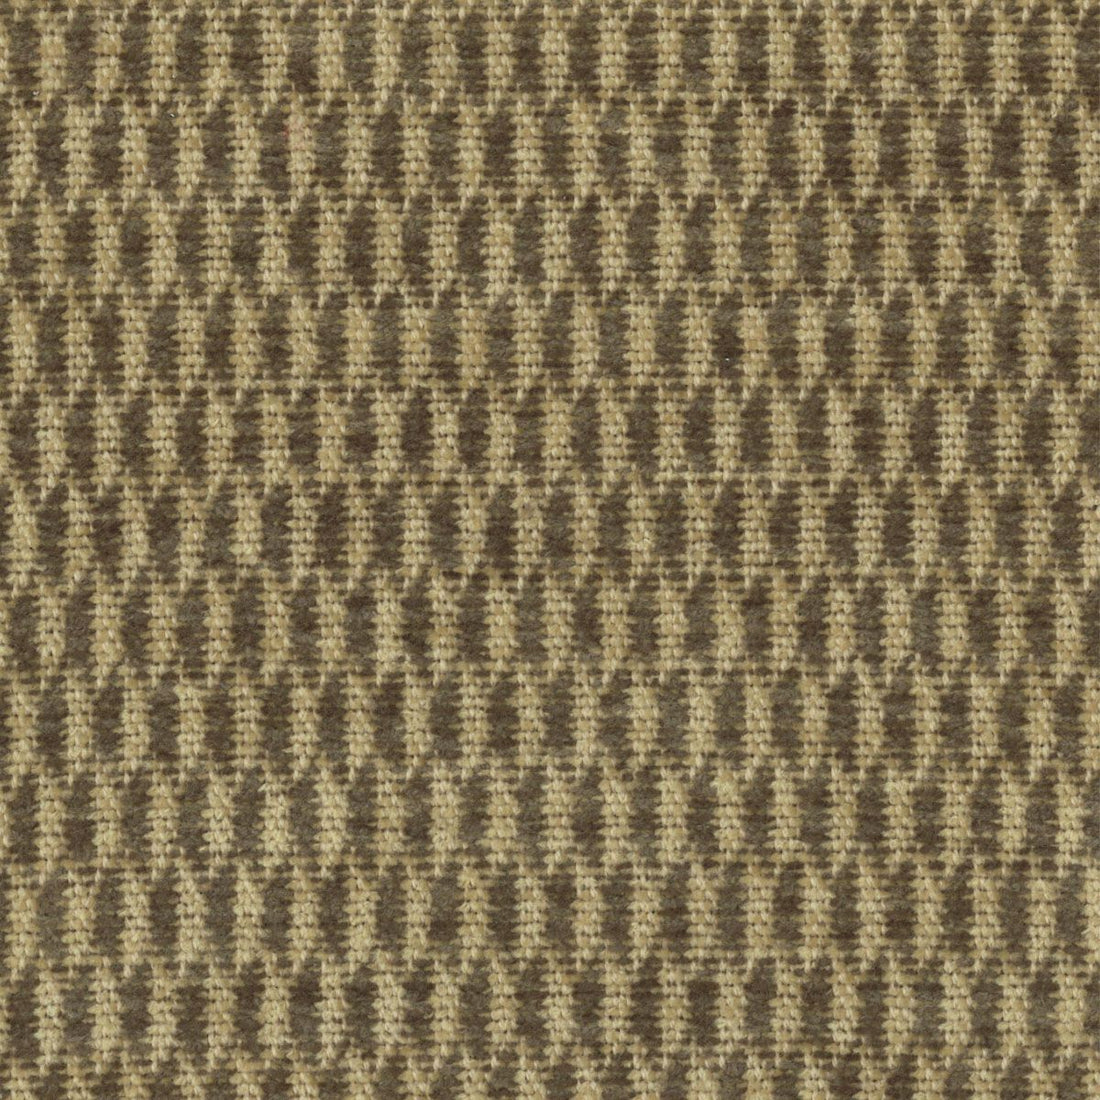 Ridgway Chenille fabric in greystone color - pattern number PW 00054102 - by Scalamandre in the Old World Weavers collection